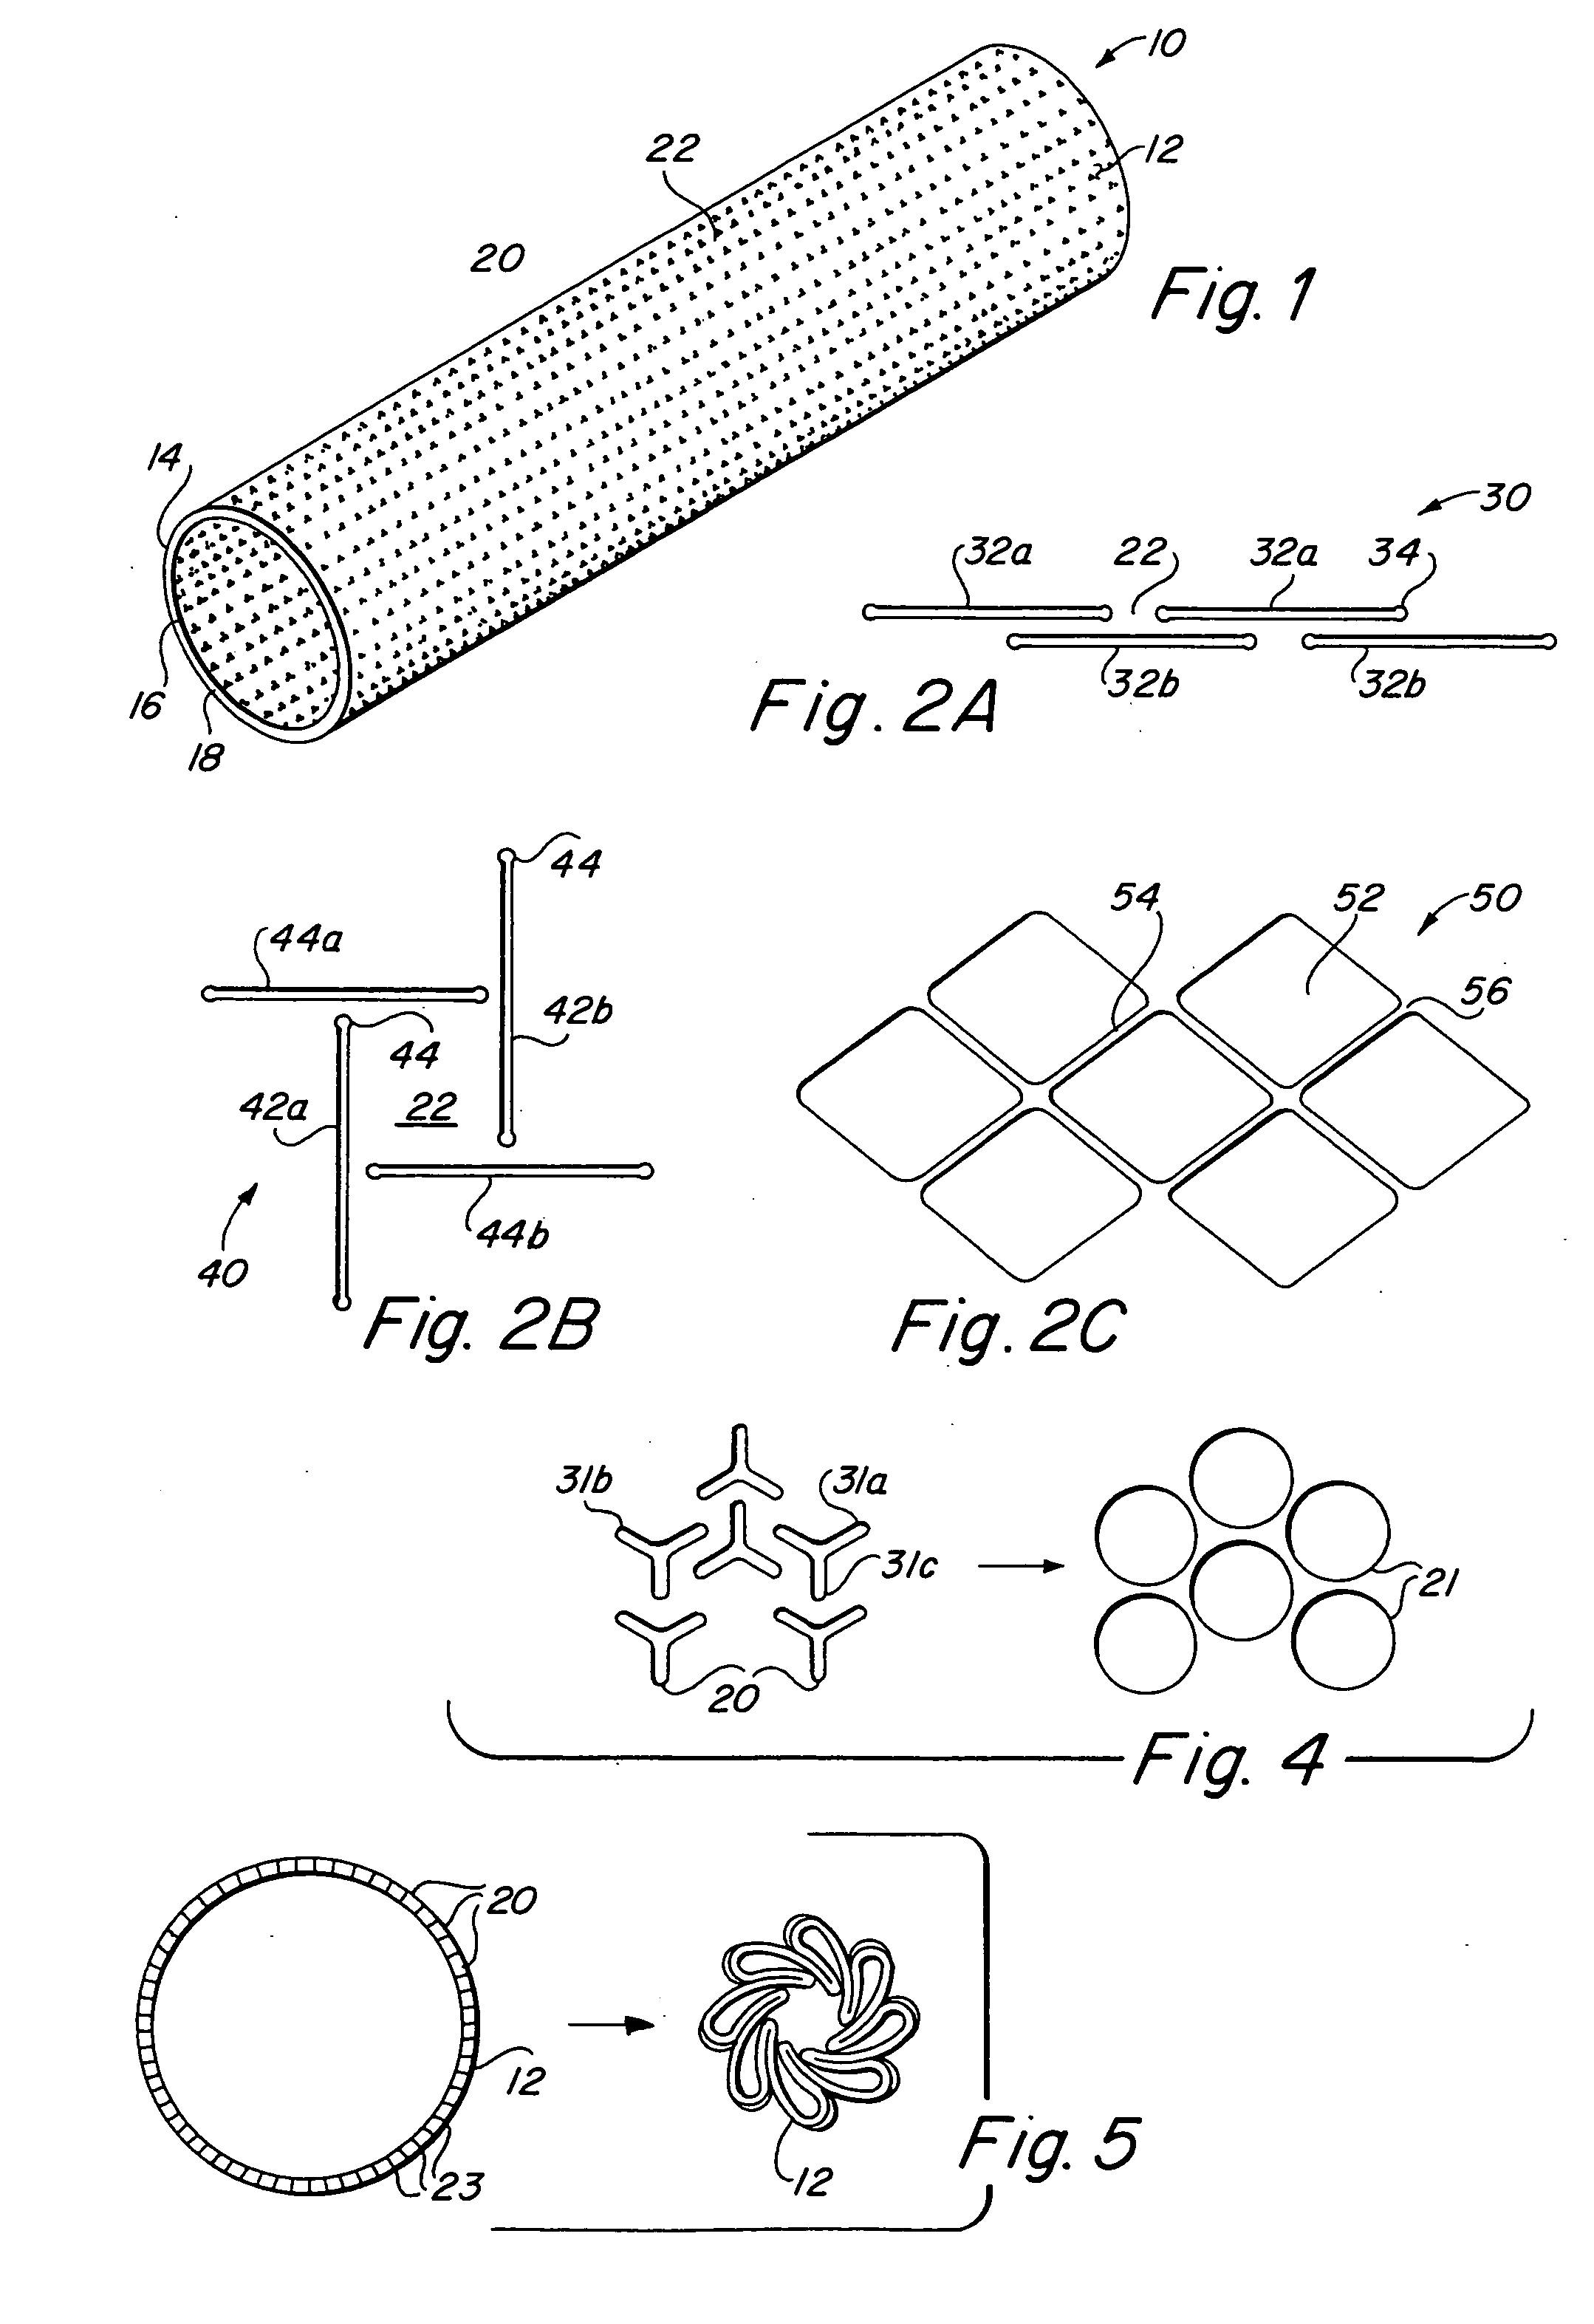 Compliant implantable medical devices and methods of making same